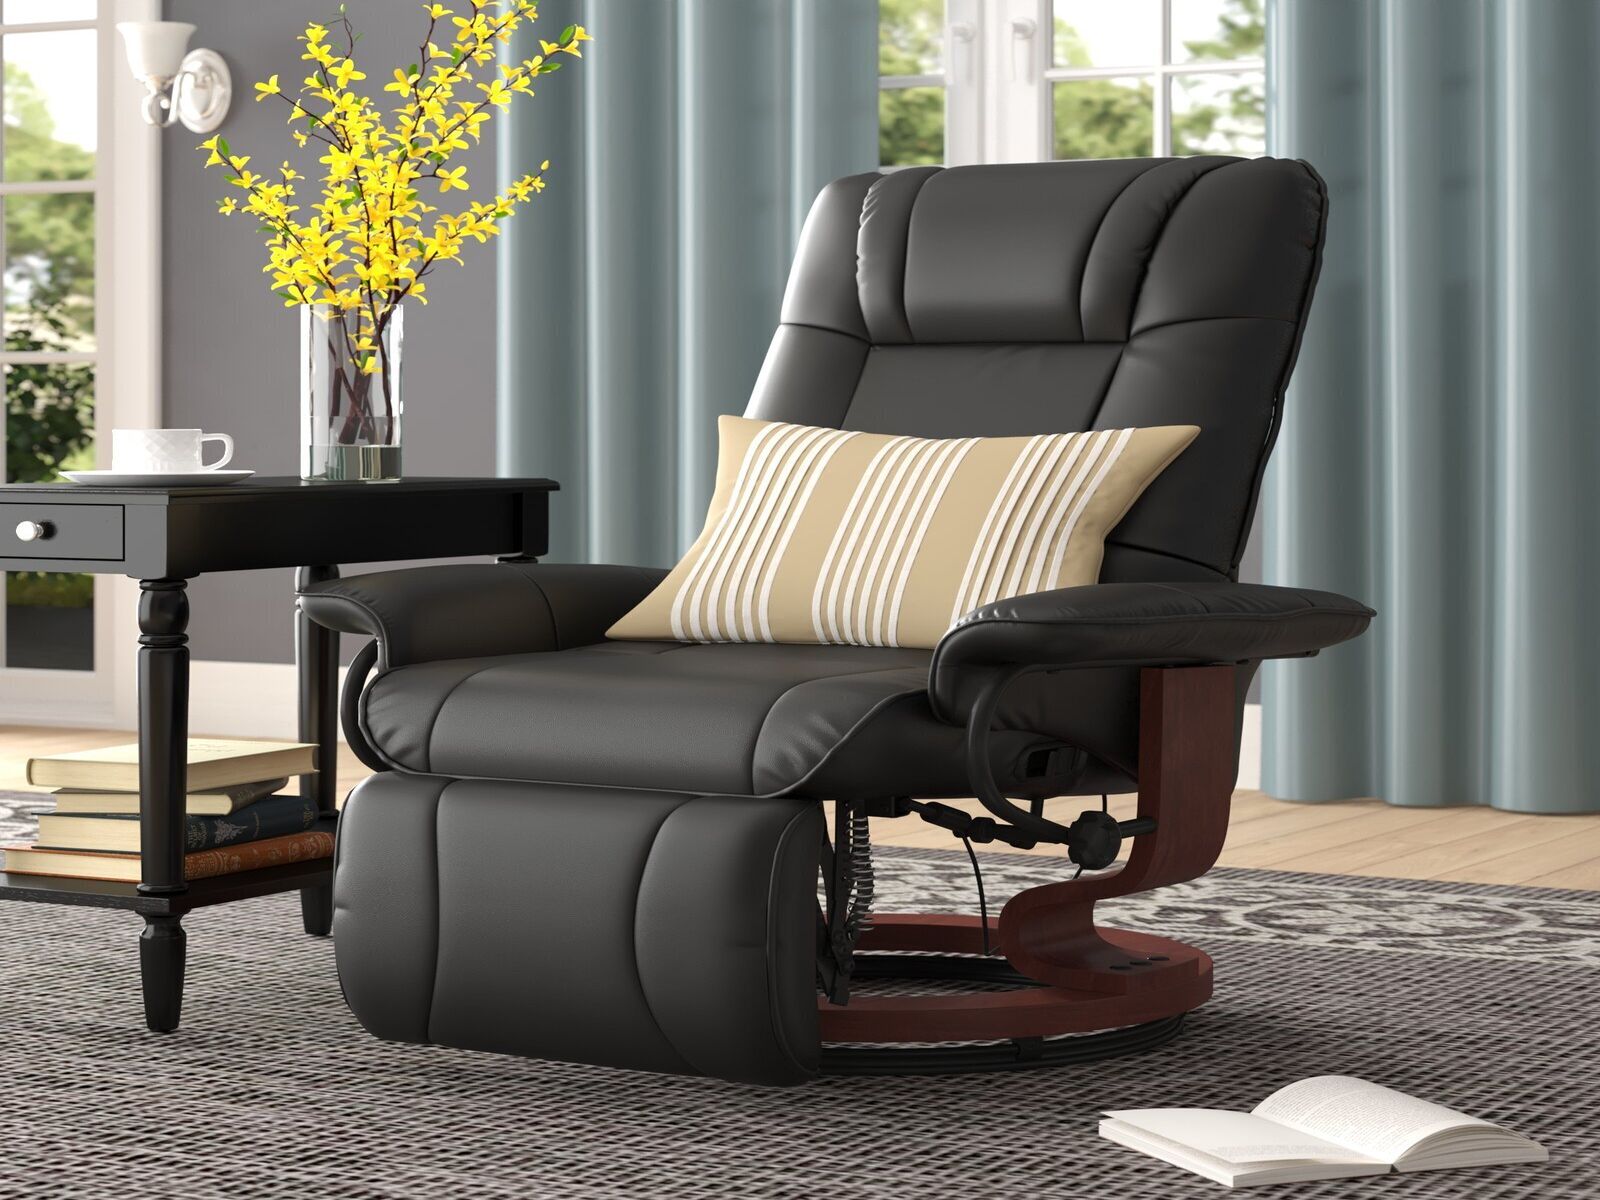 What Is a Swivel Glider Chair?